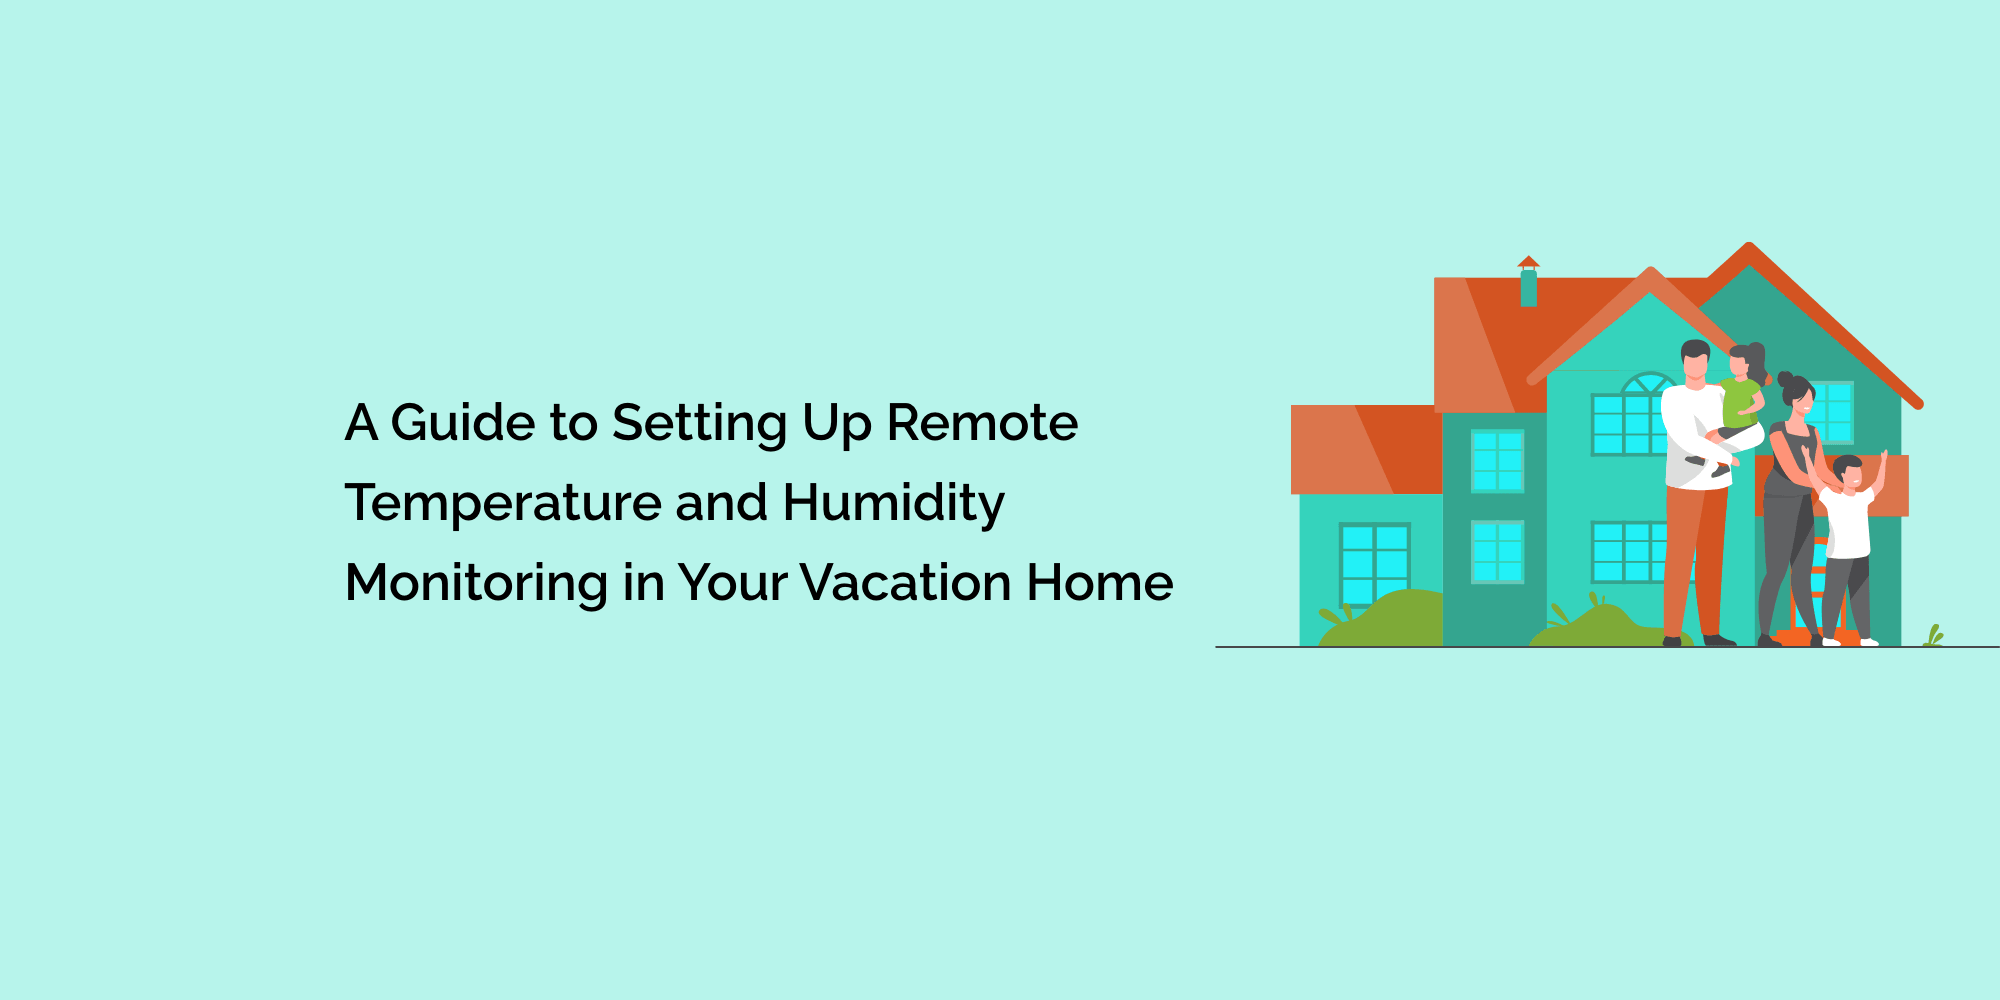 A Guide to Setting Up Remote Temperature and Humidity Monitoring in Your Vacation Home